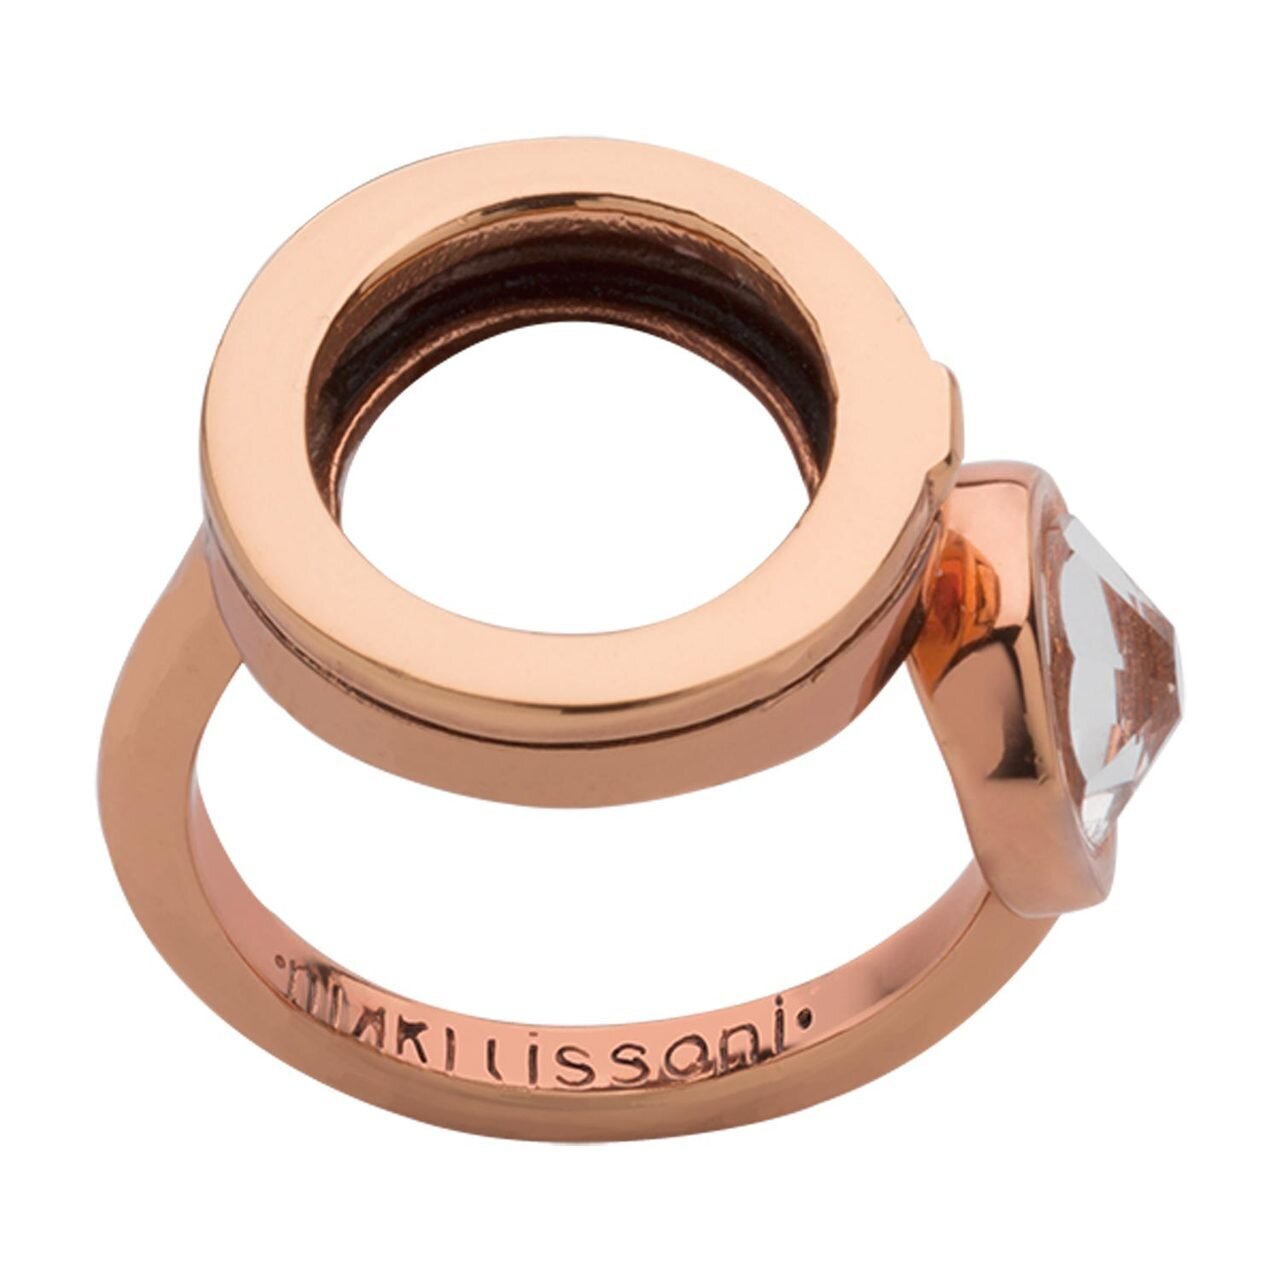 Nikki Lissoni Interchangeable Open Ring with Swarovski Stone Rose Gold-plated Size 7 R1007RG7